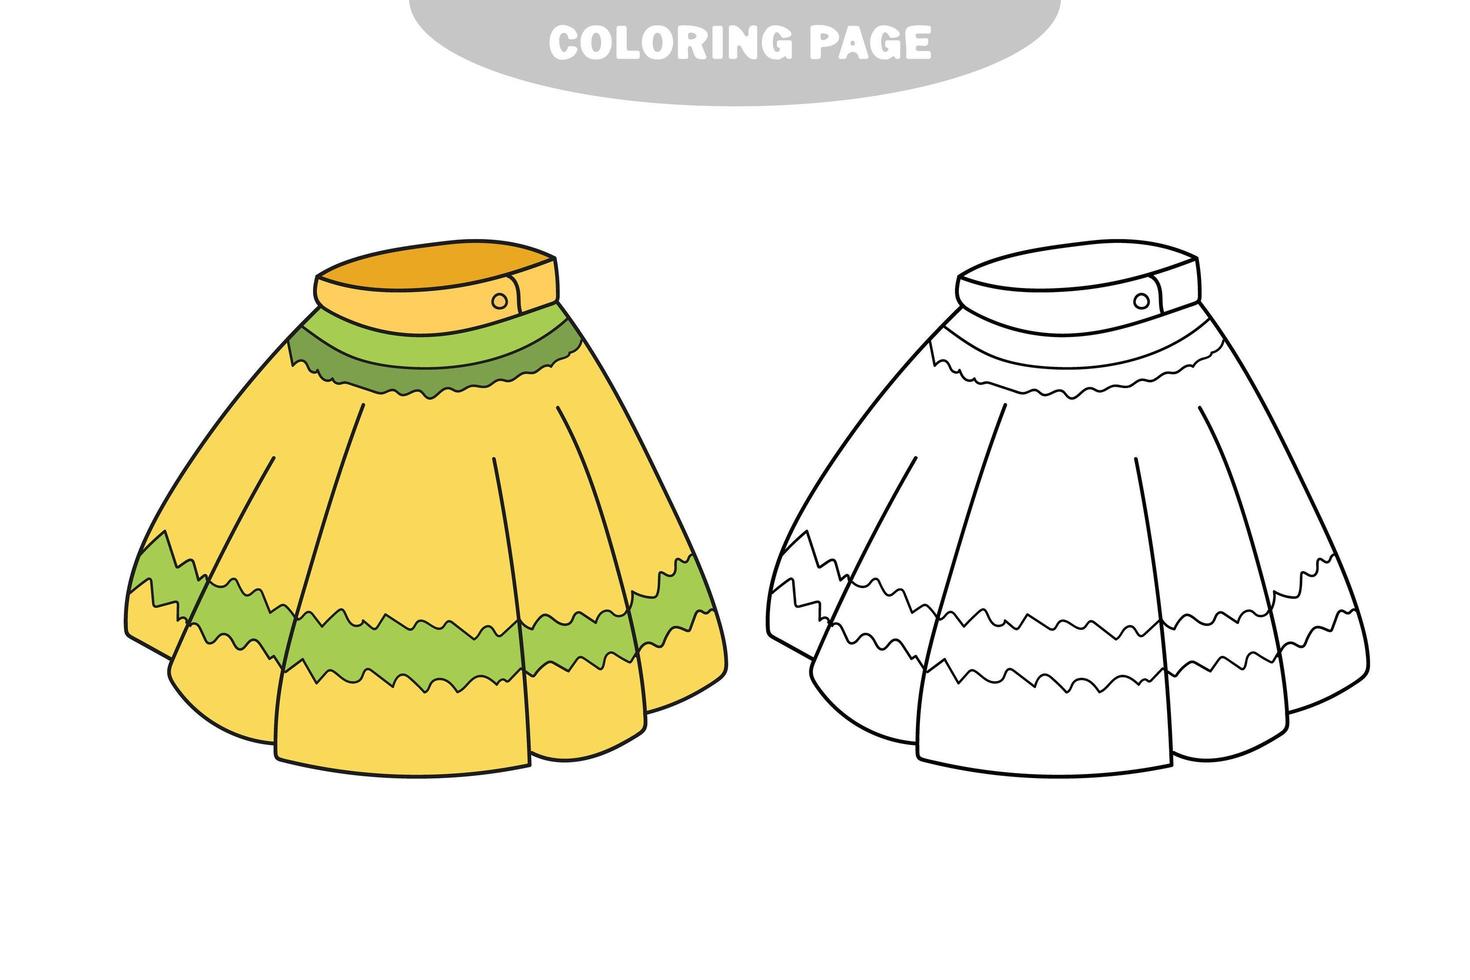 Simple coloring page. Skirt to be colored, the coloring book vector